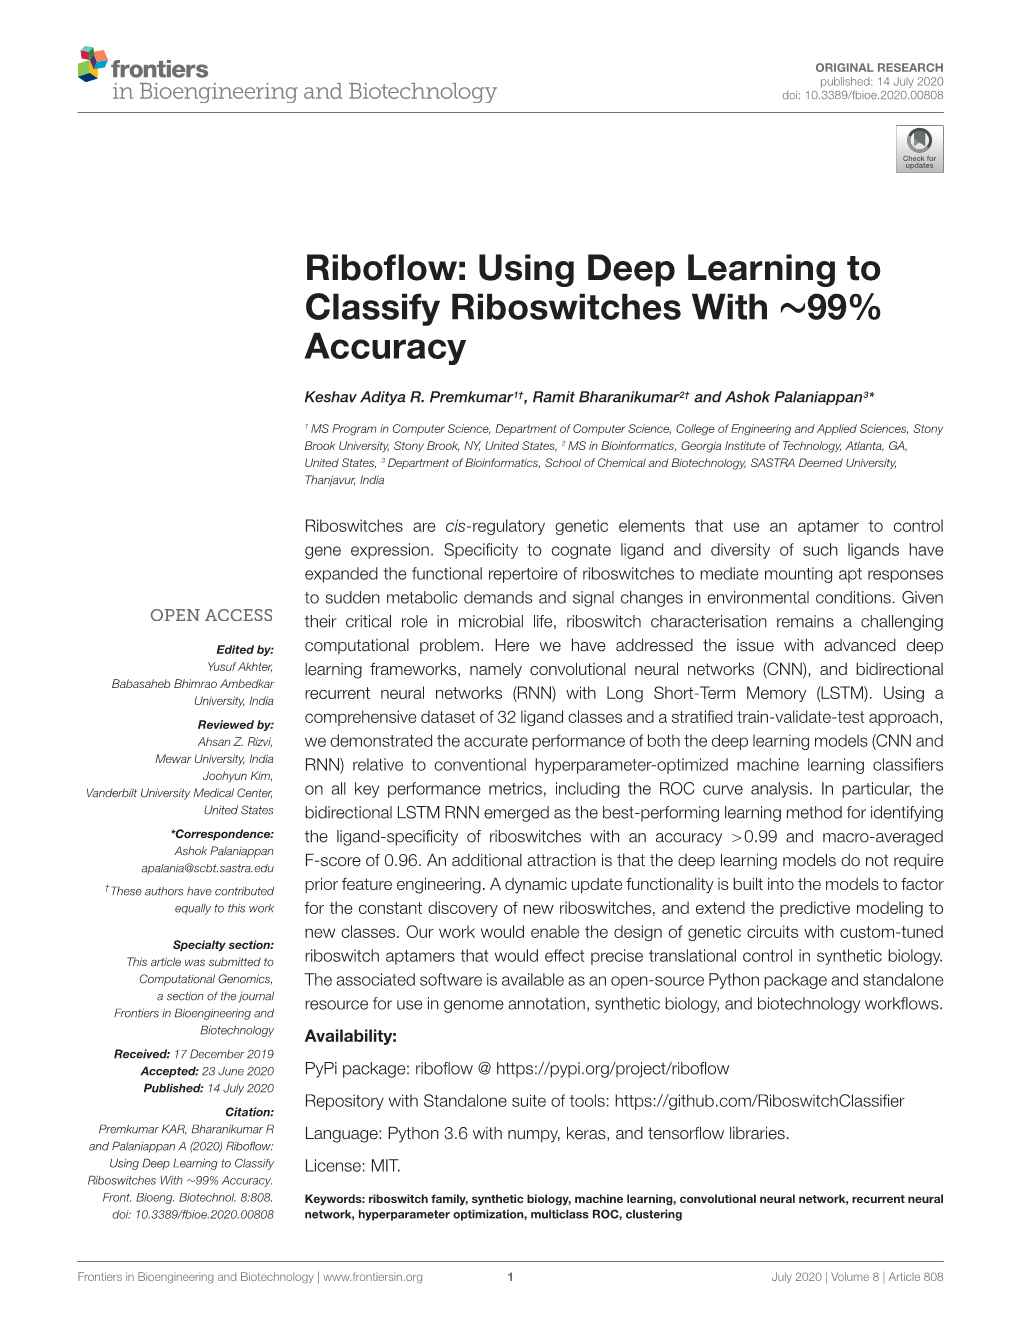 Using Deep Learning to Classify Riboswitches with 99